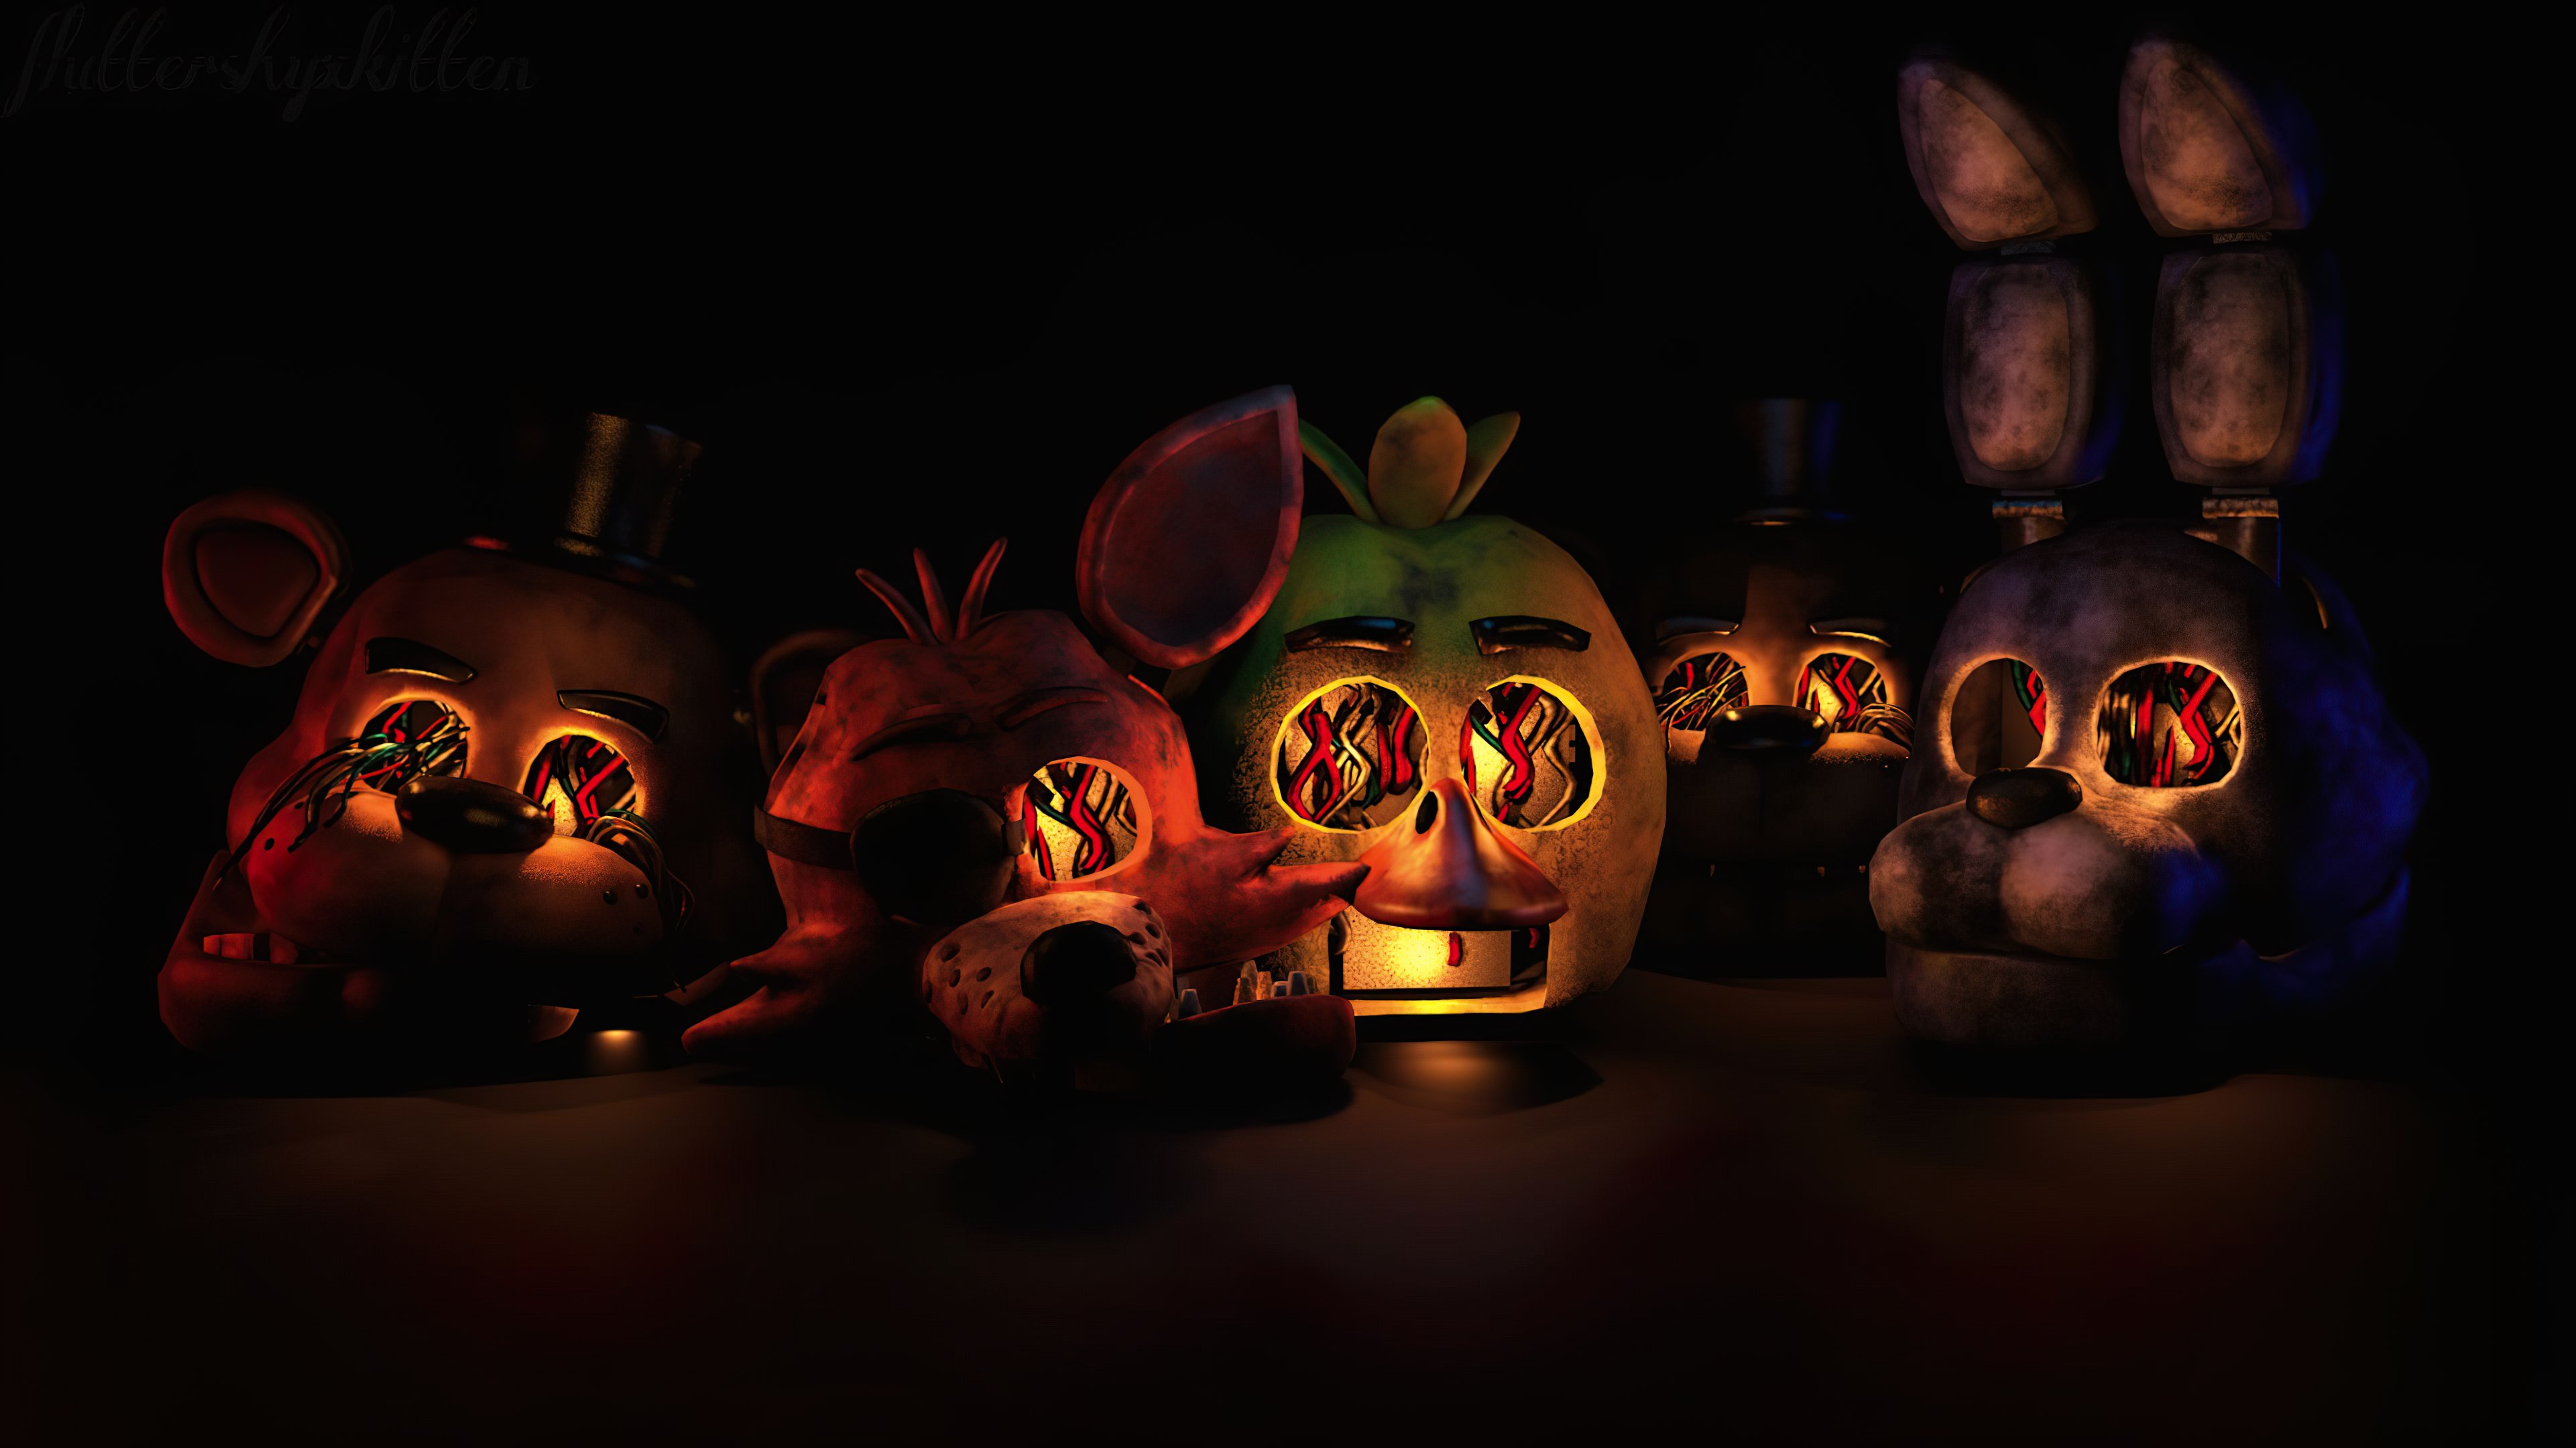 Five Nights at Freddy's 3: bad ending